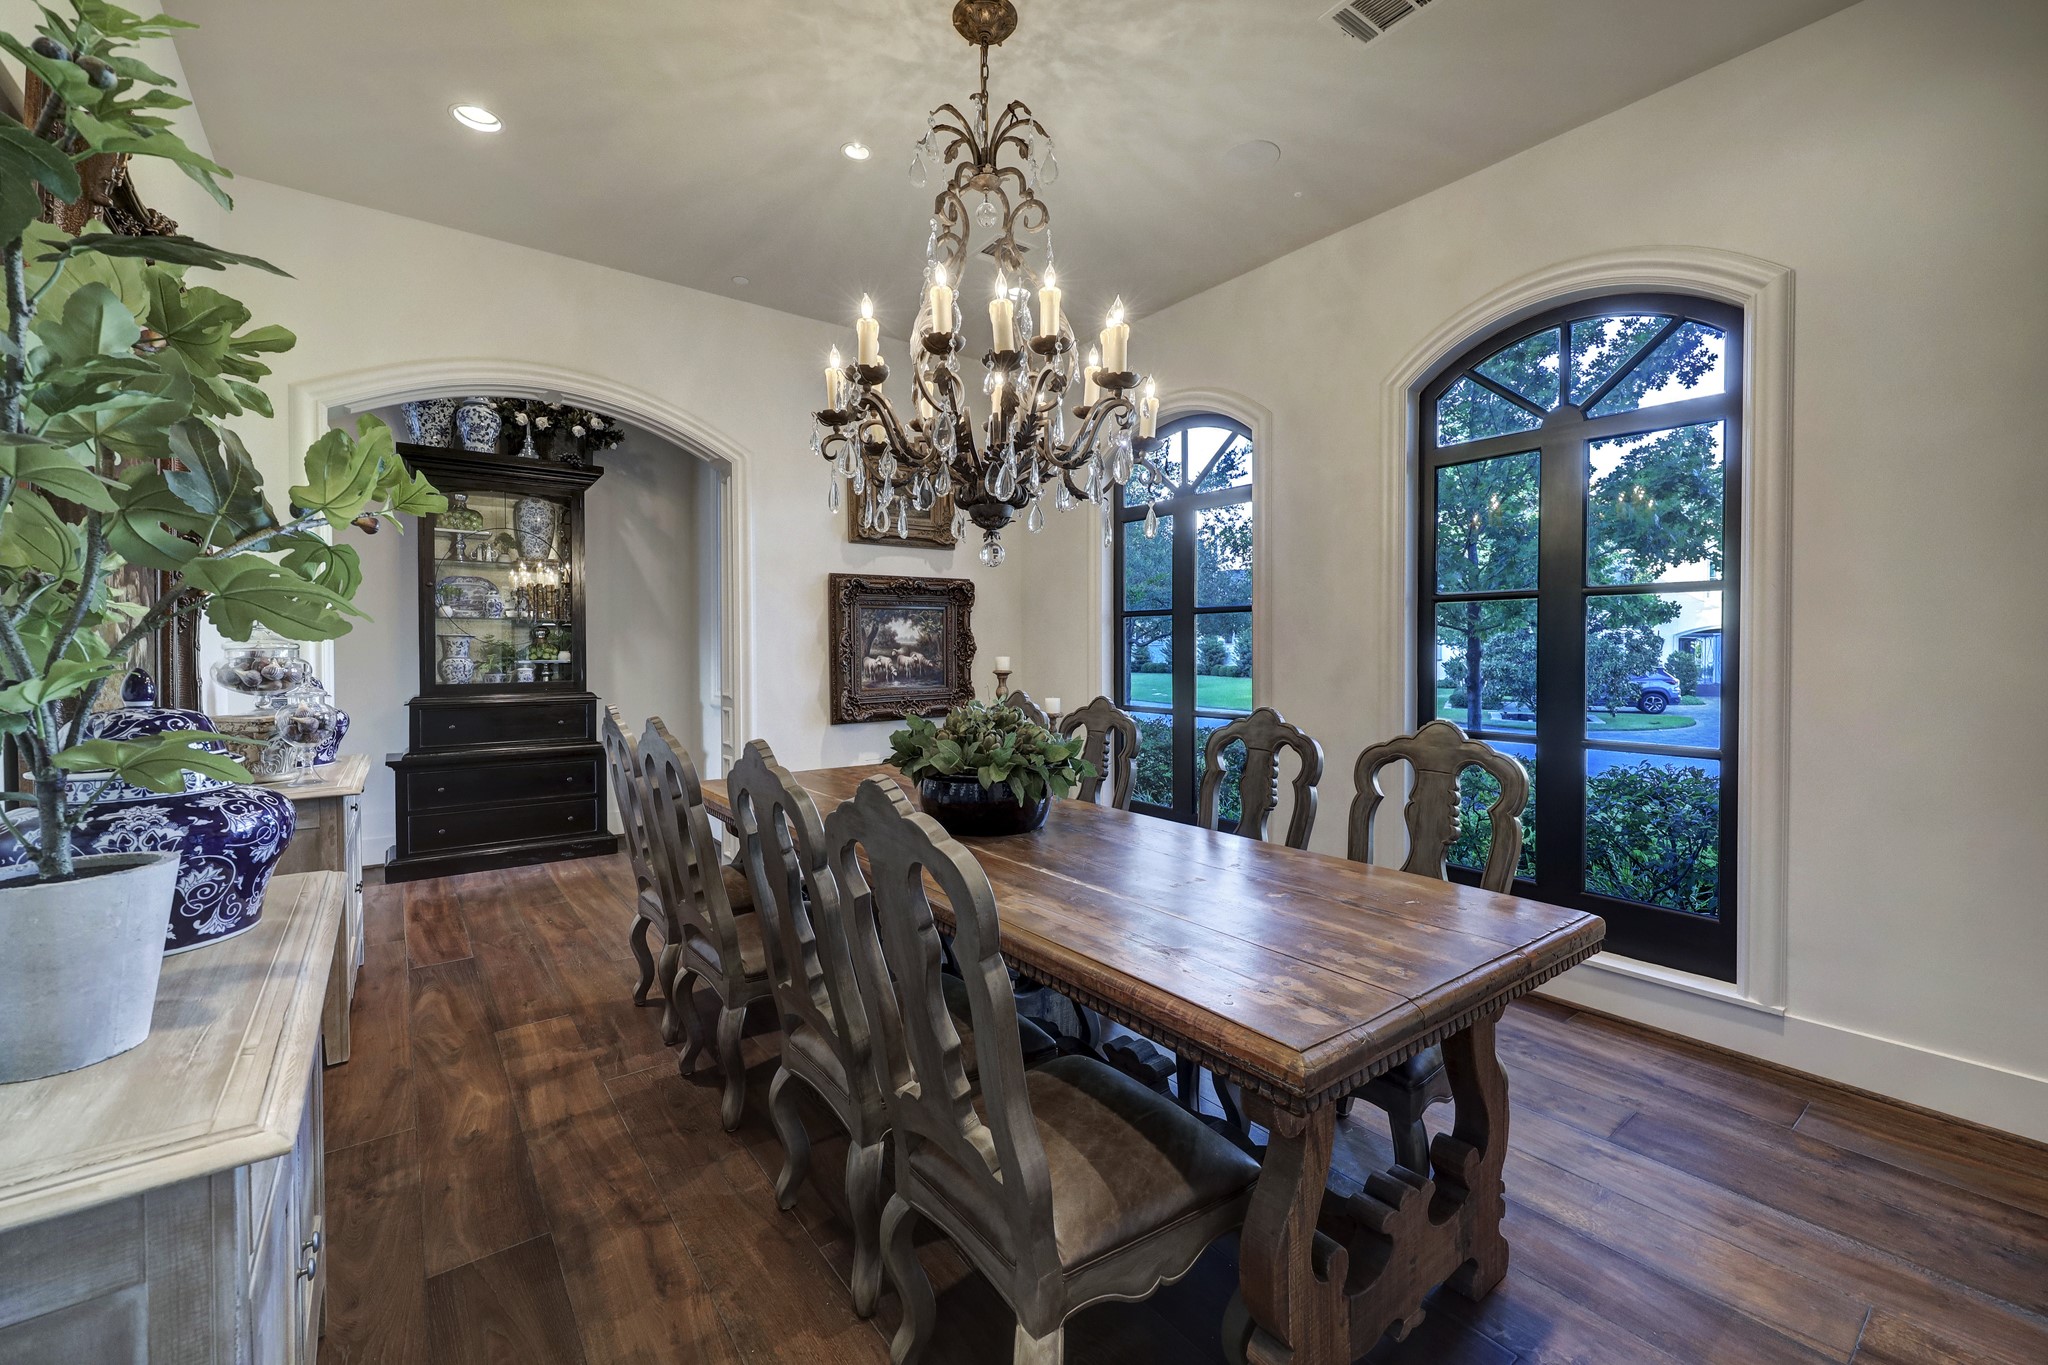 Access from the entry foyer leads to your formal dining room (17 X 13). Large windows and high ceilings allow natural lighting in.